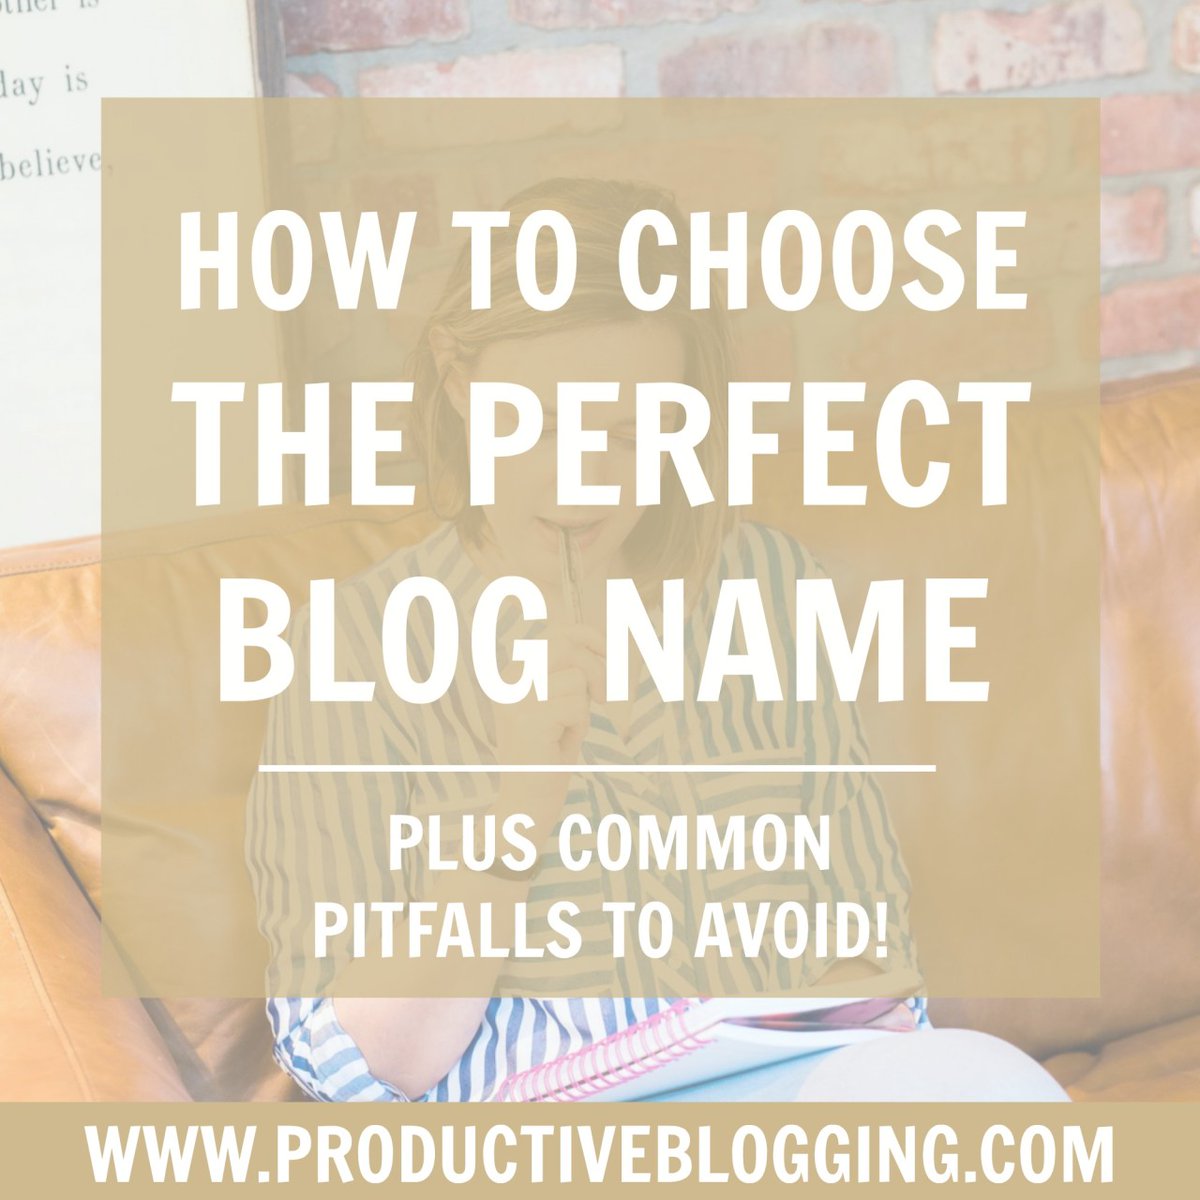 How to choose the perfect blog name =>bit.ly/2Q5puKe #blogname #newblogname #perfectblogname #newblogger #newblog #domainname